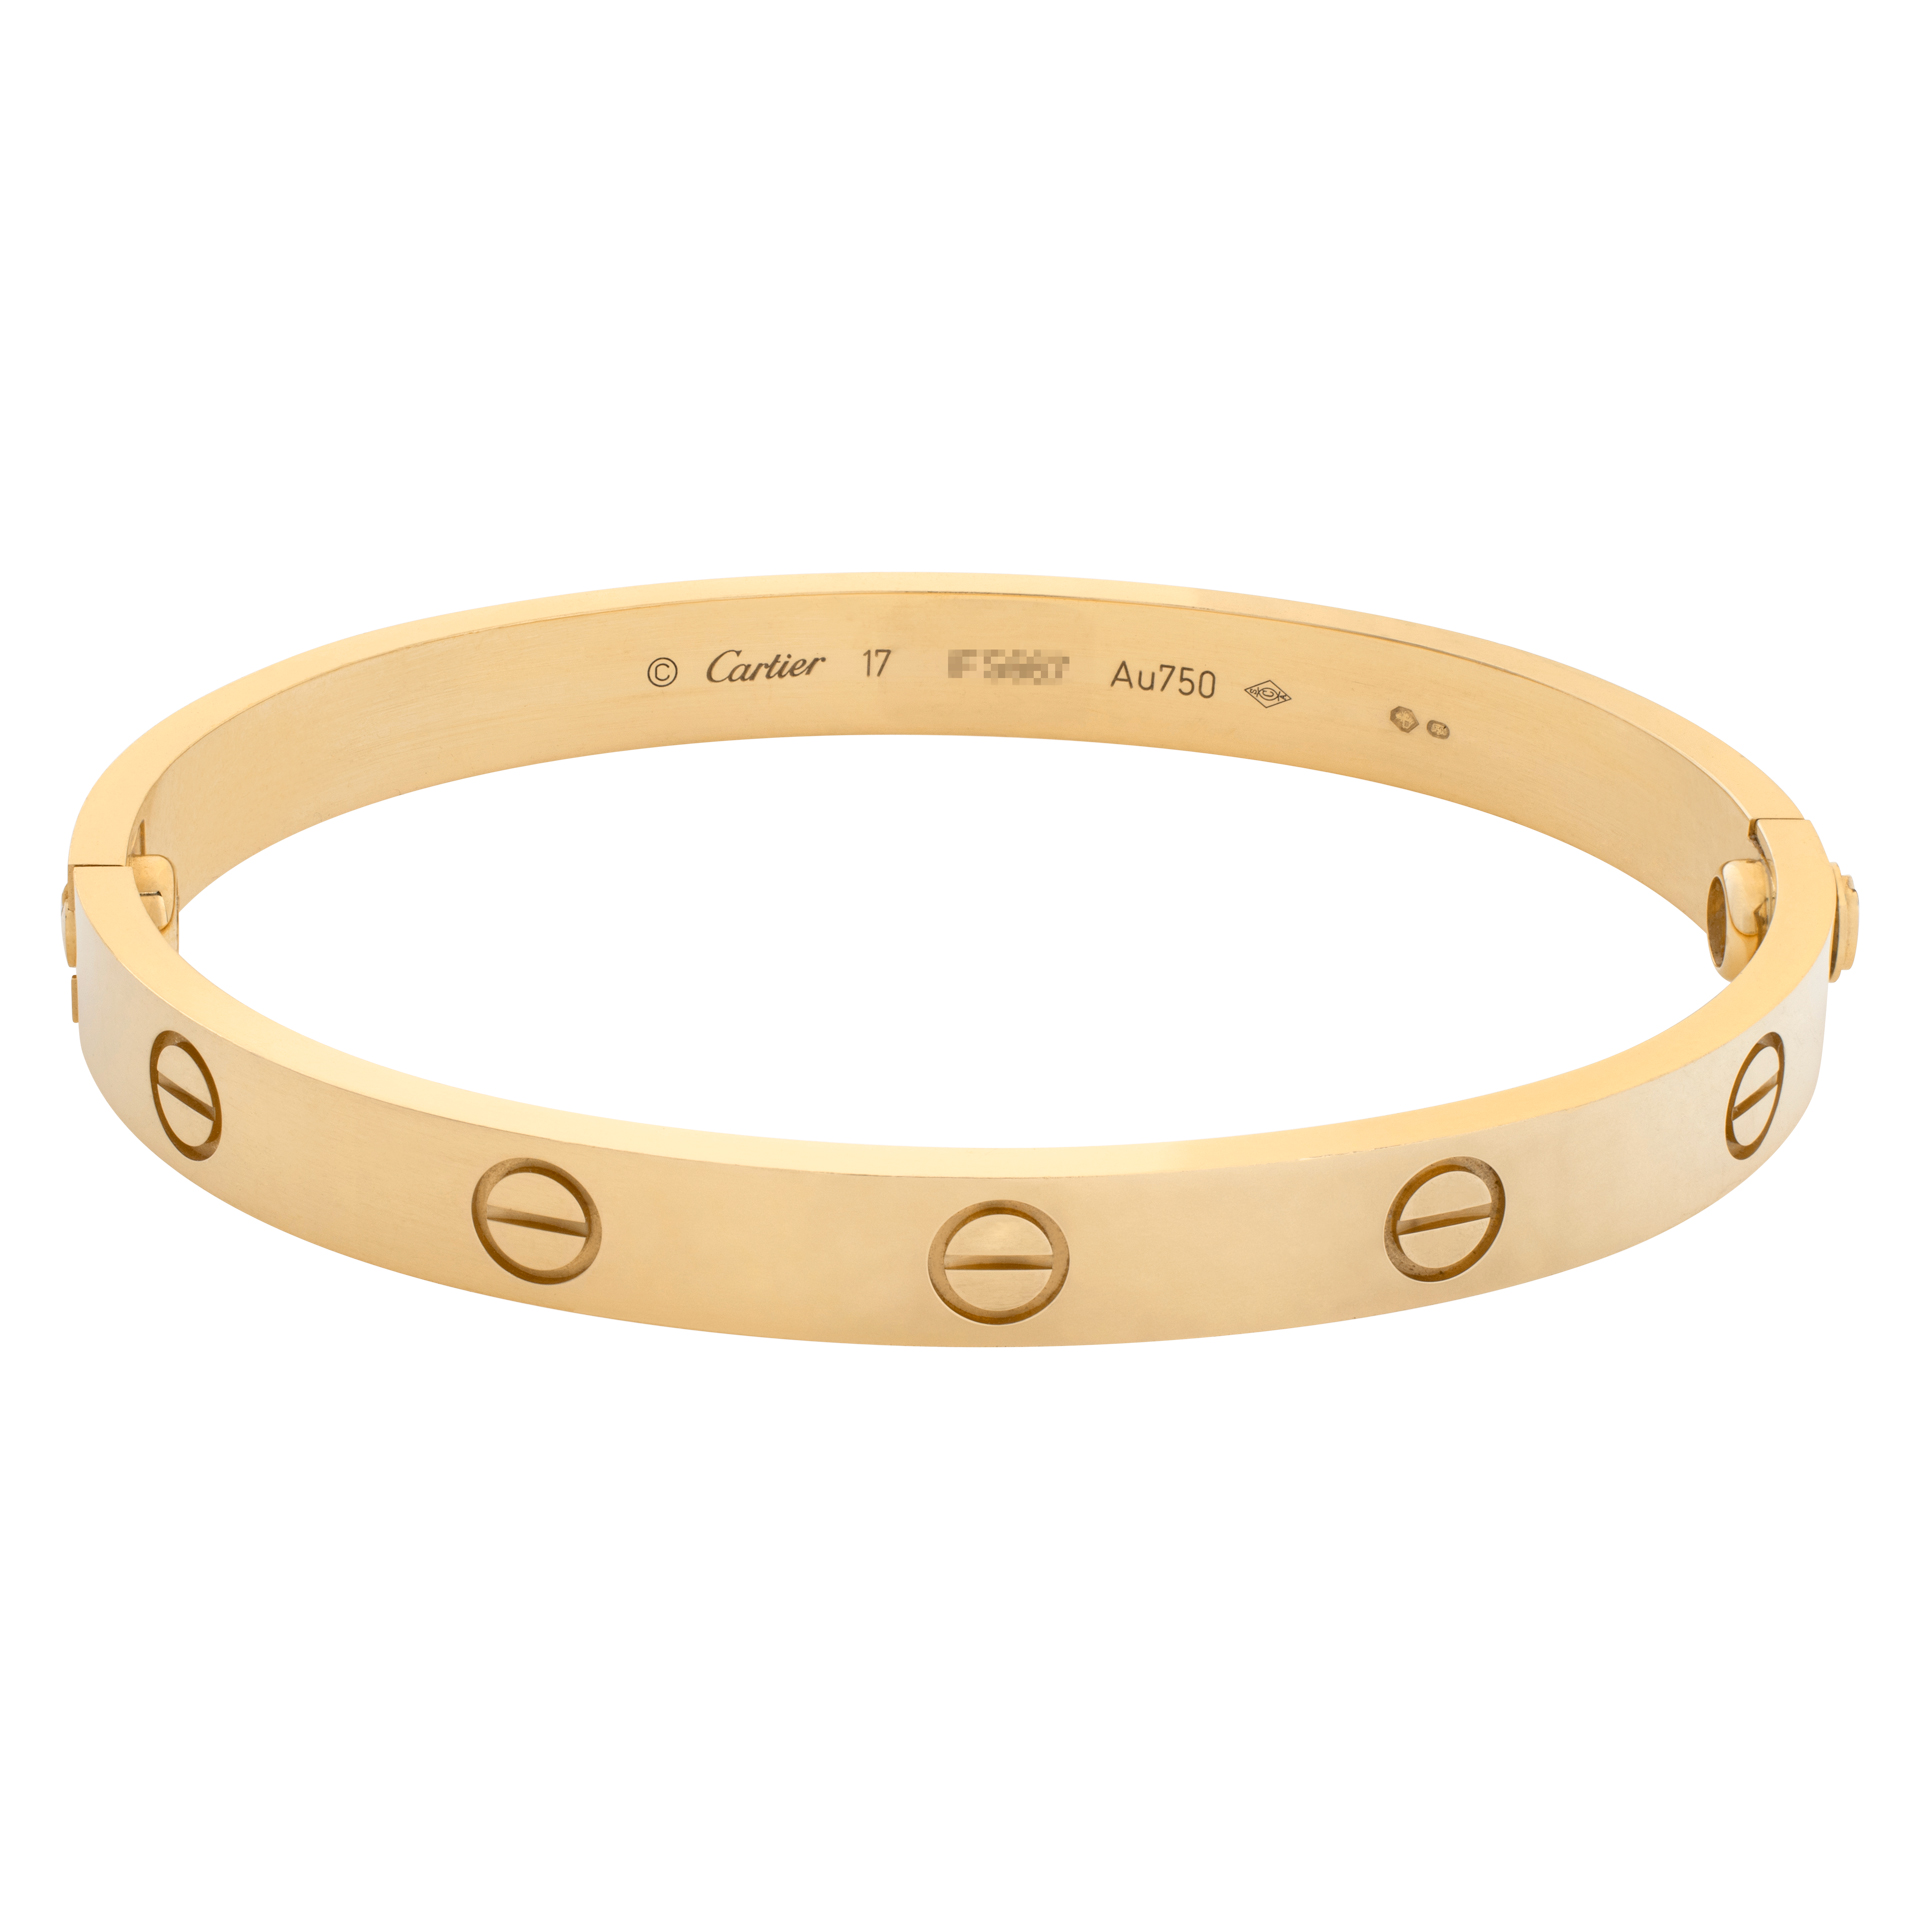 Cartier Love Bracelet in 18K Yellow Gold Size 17- Complete with Box, Cartier Certificate, and Screw Driver image 1